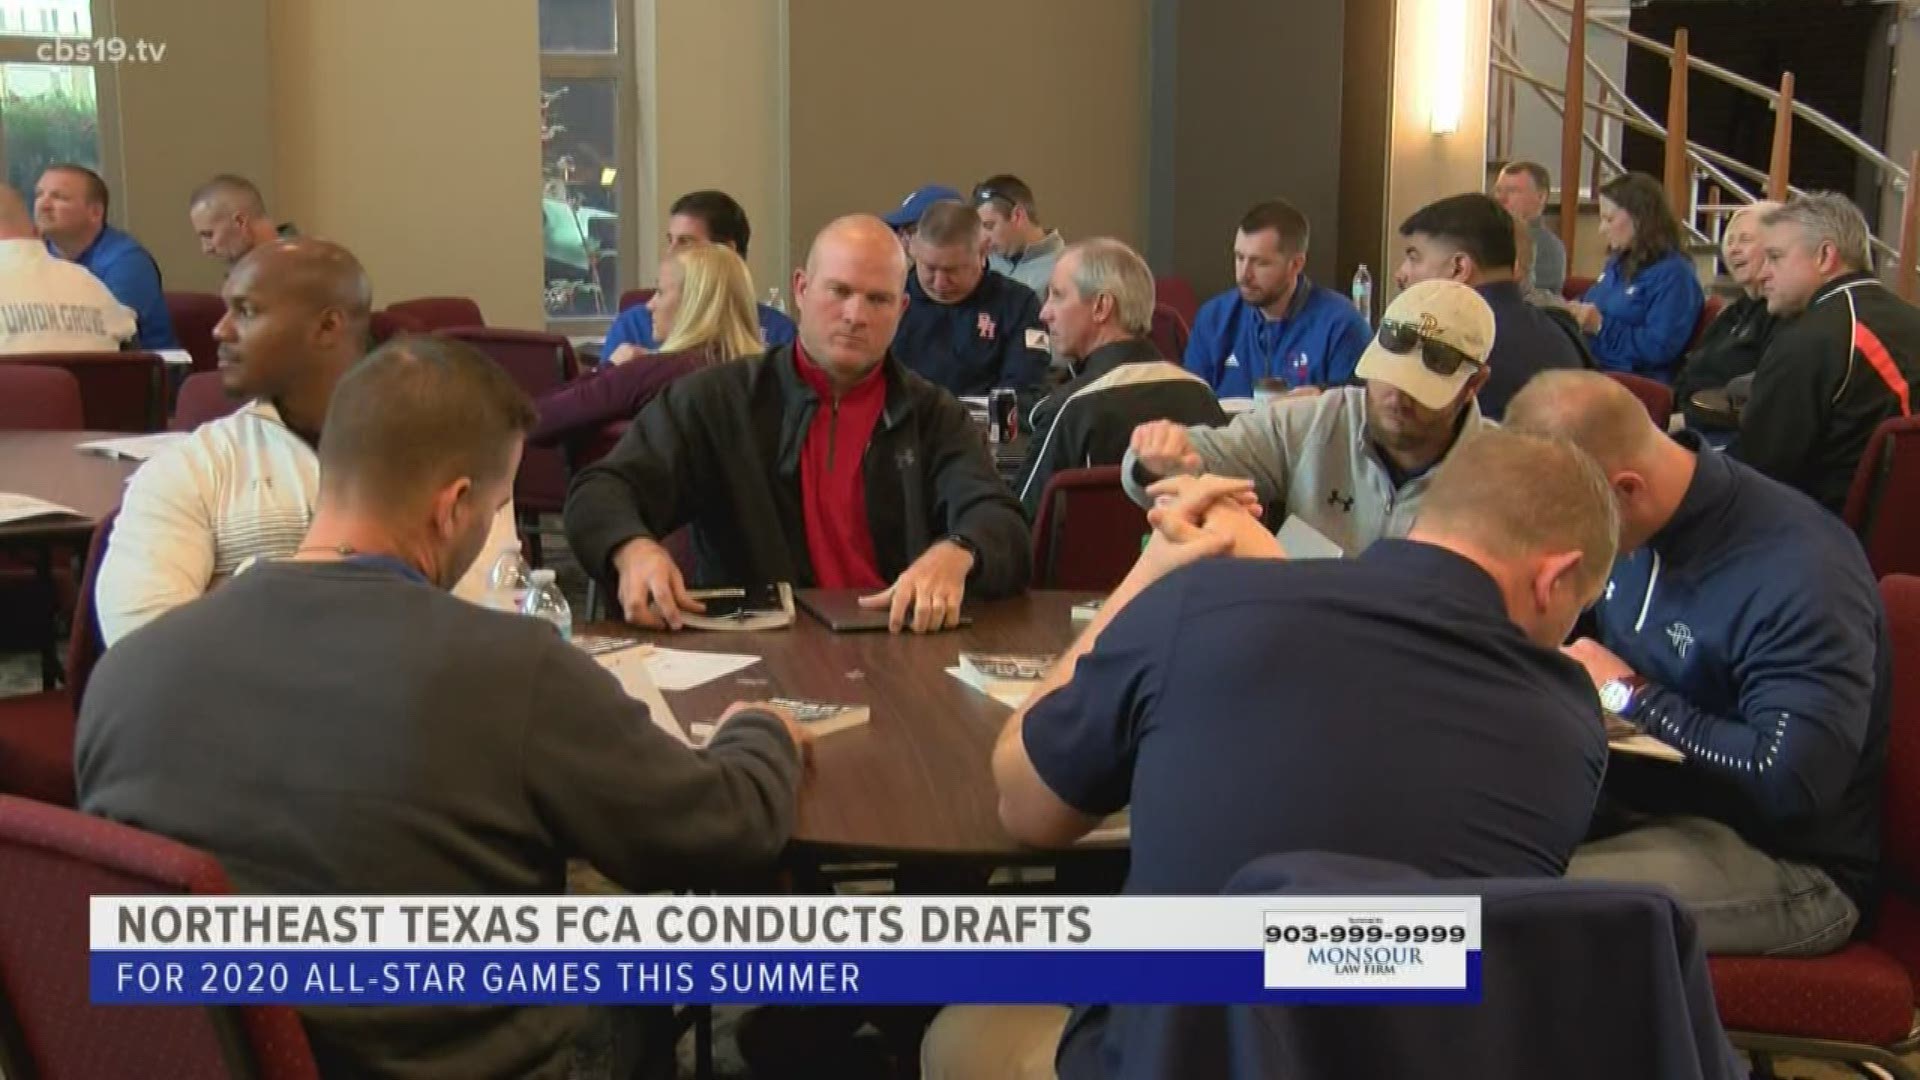 Some of the best coaches from across East Texas traveled to the First Christian Church in Tyler for the annual FCA All-Star "Heart of a Champion" drafts.